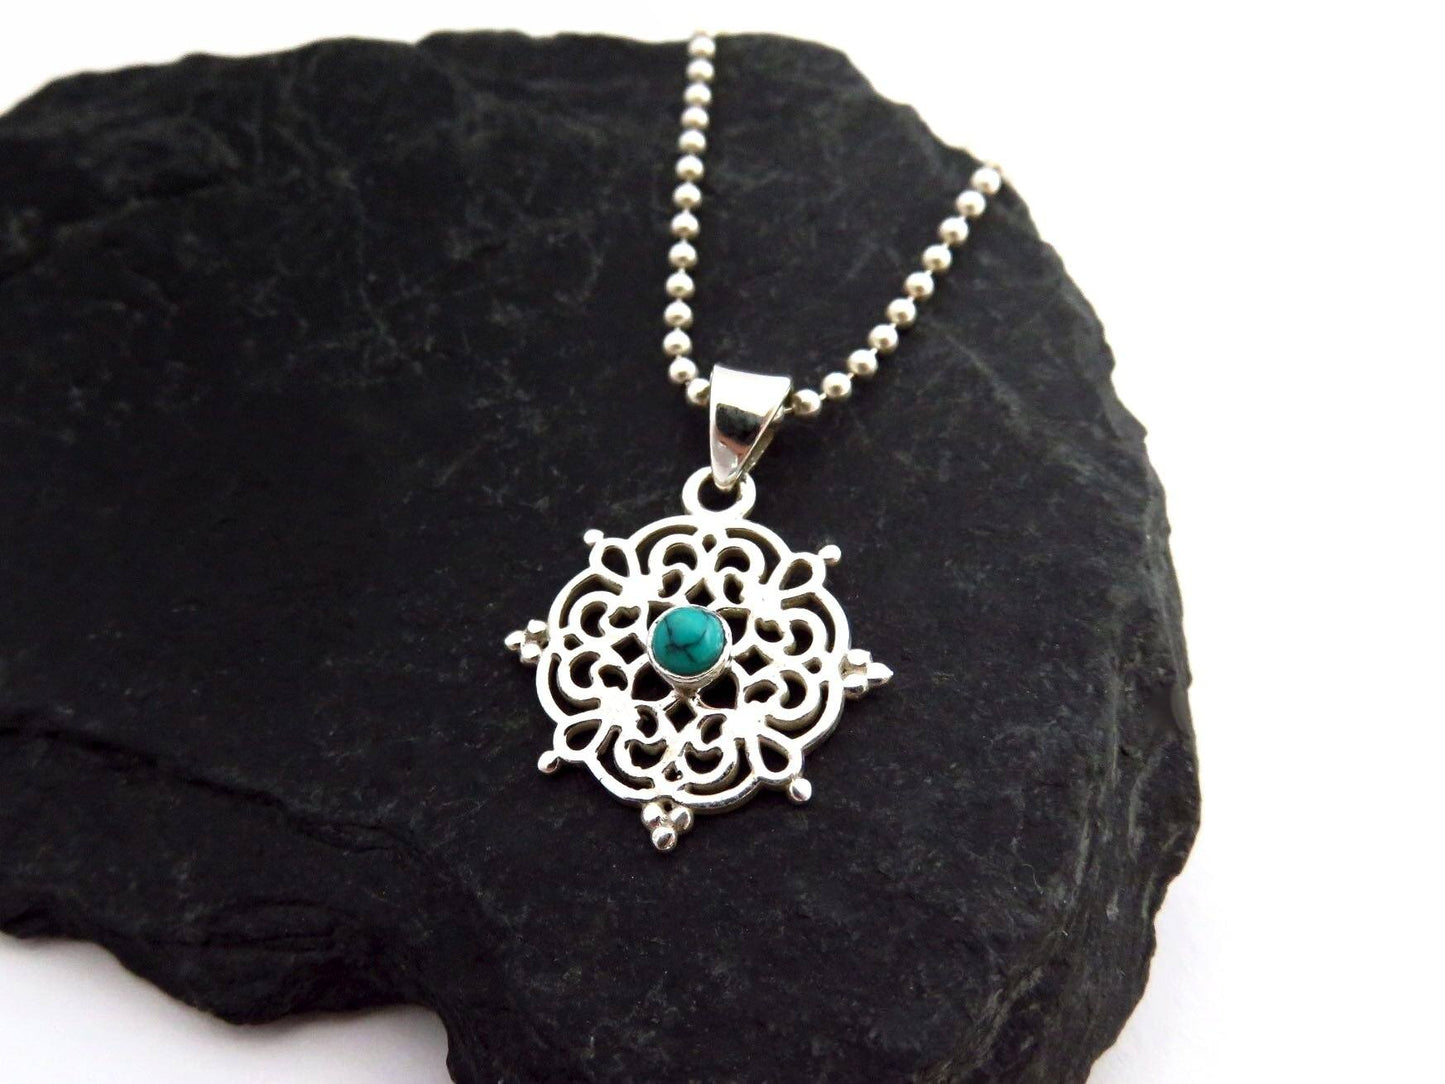 small filigree pendant with turquoise stone made of silver 